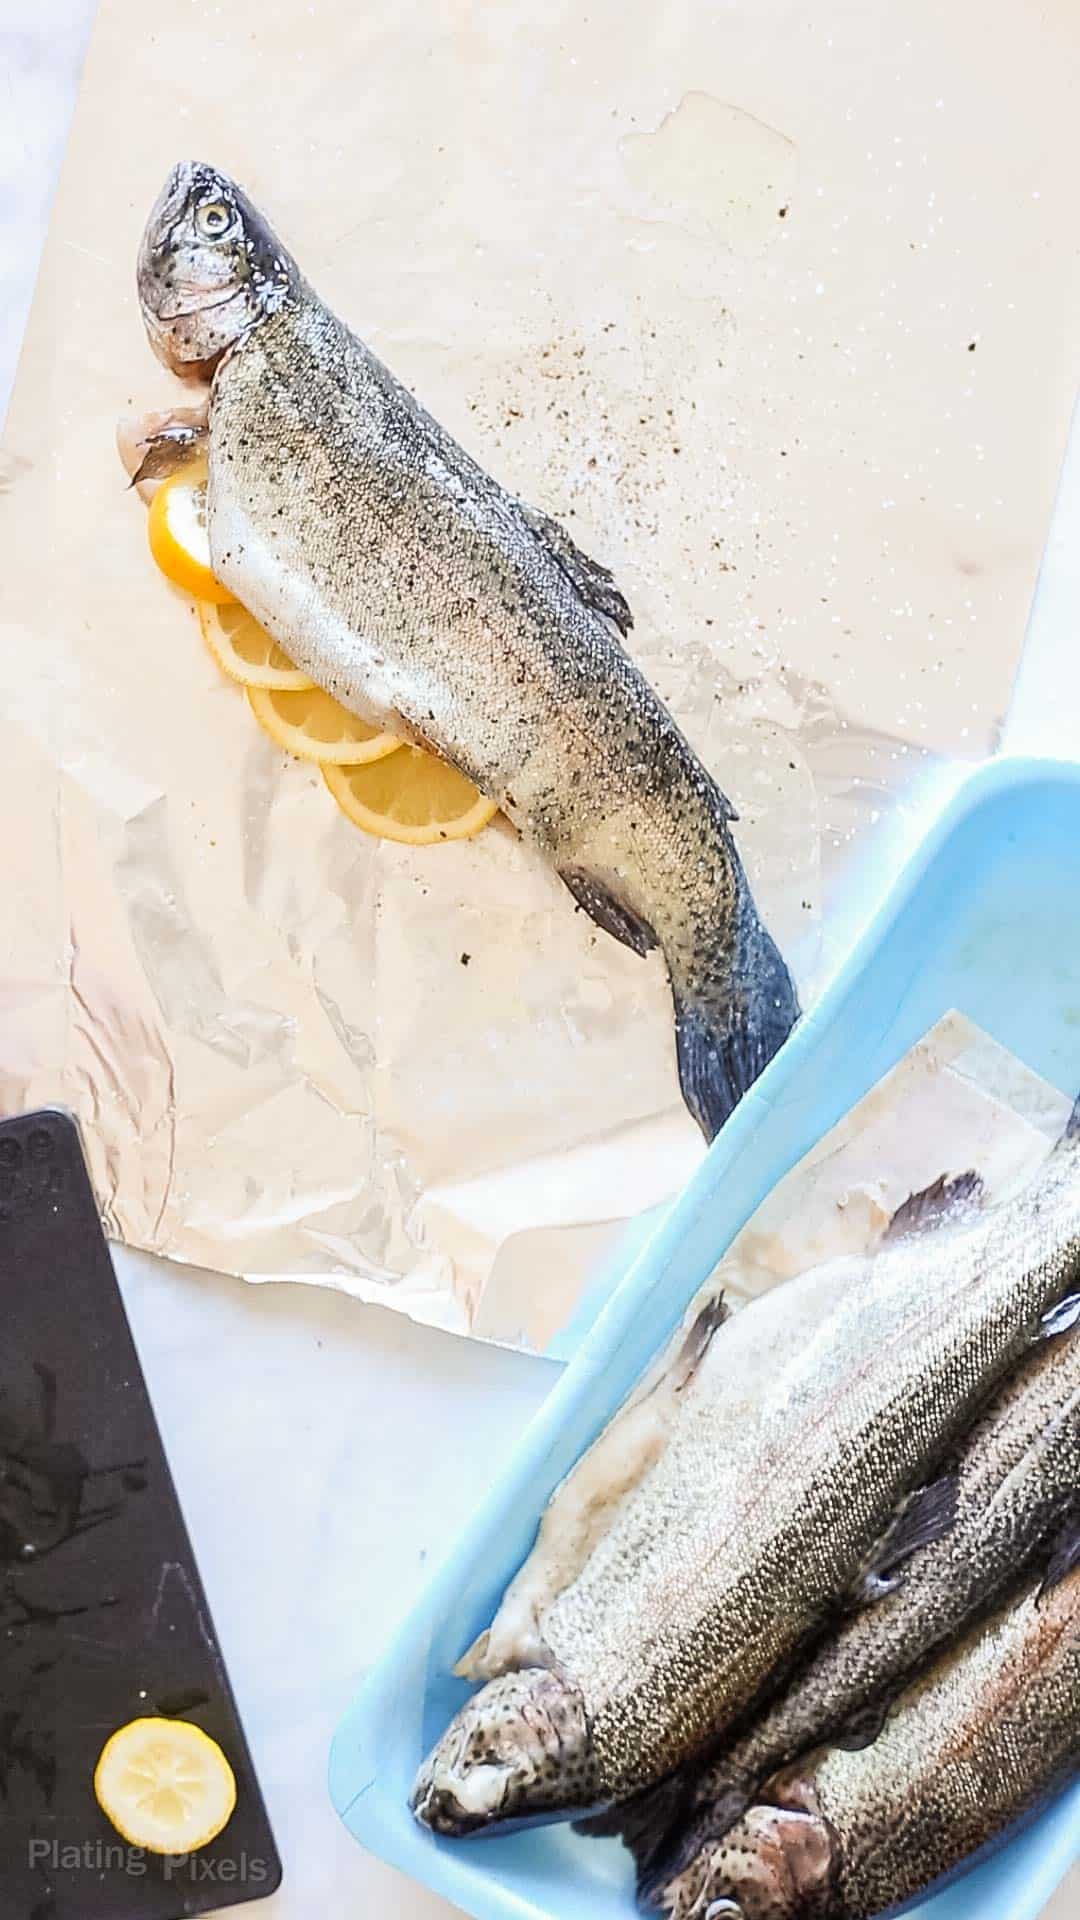 Uncooked whole trouts on a counter ready to prepare